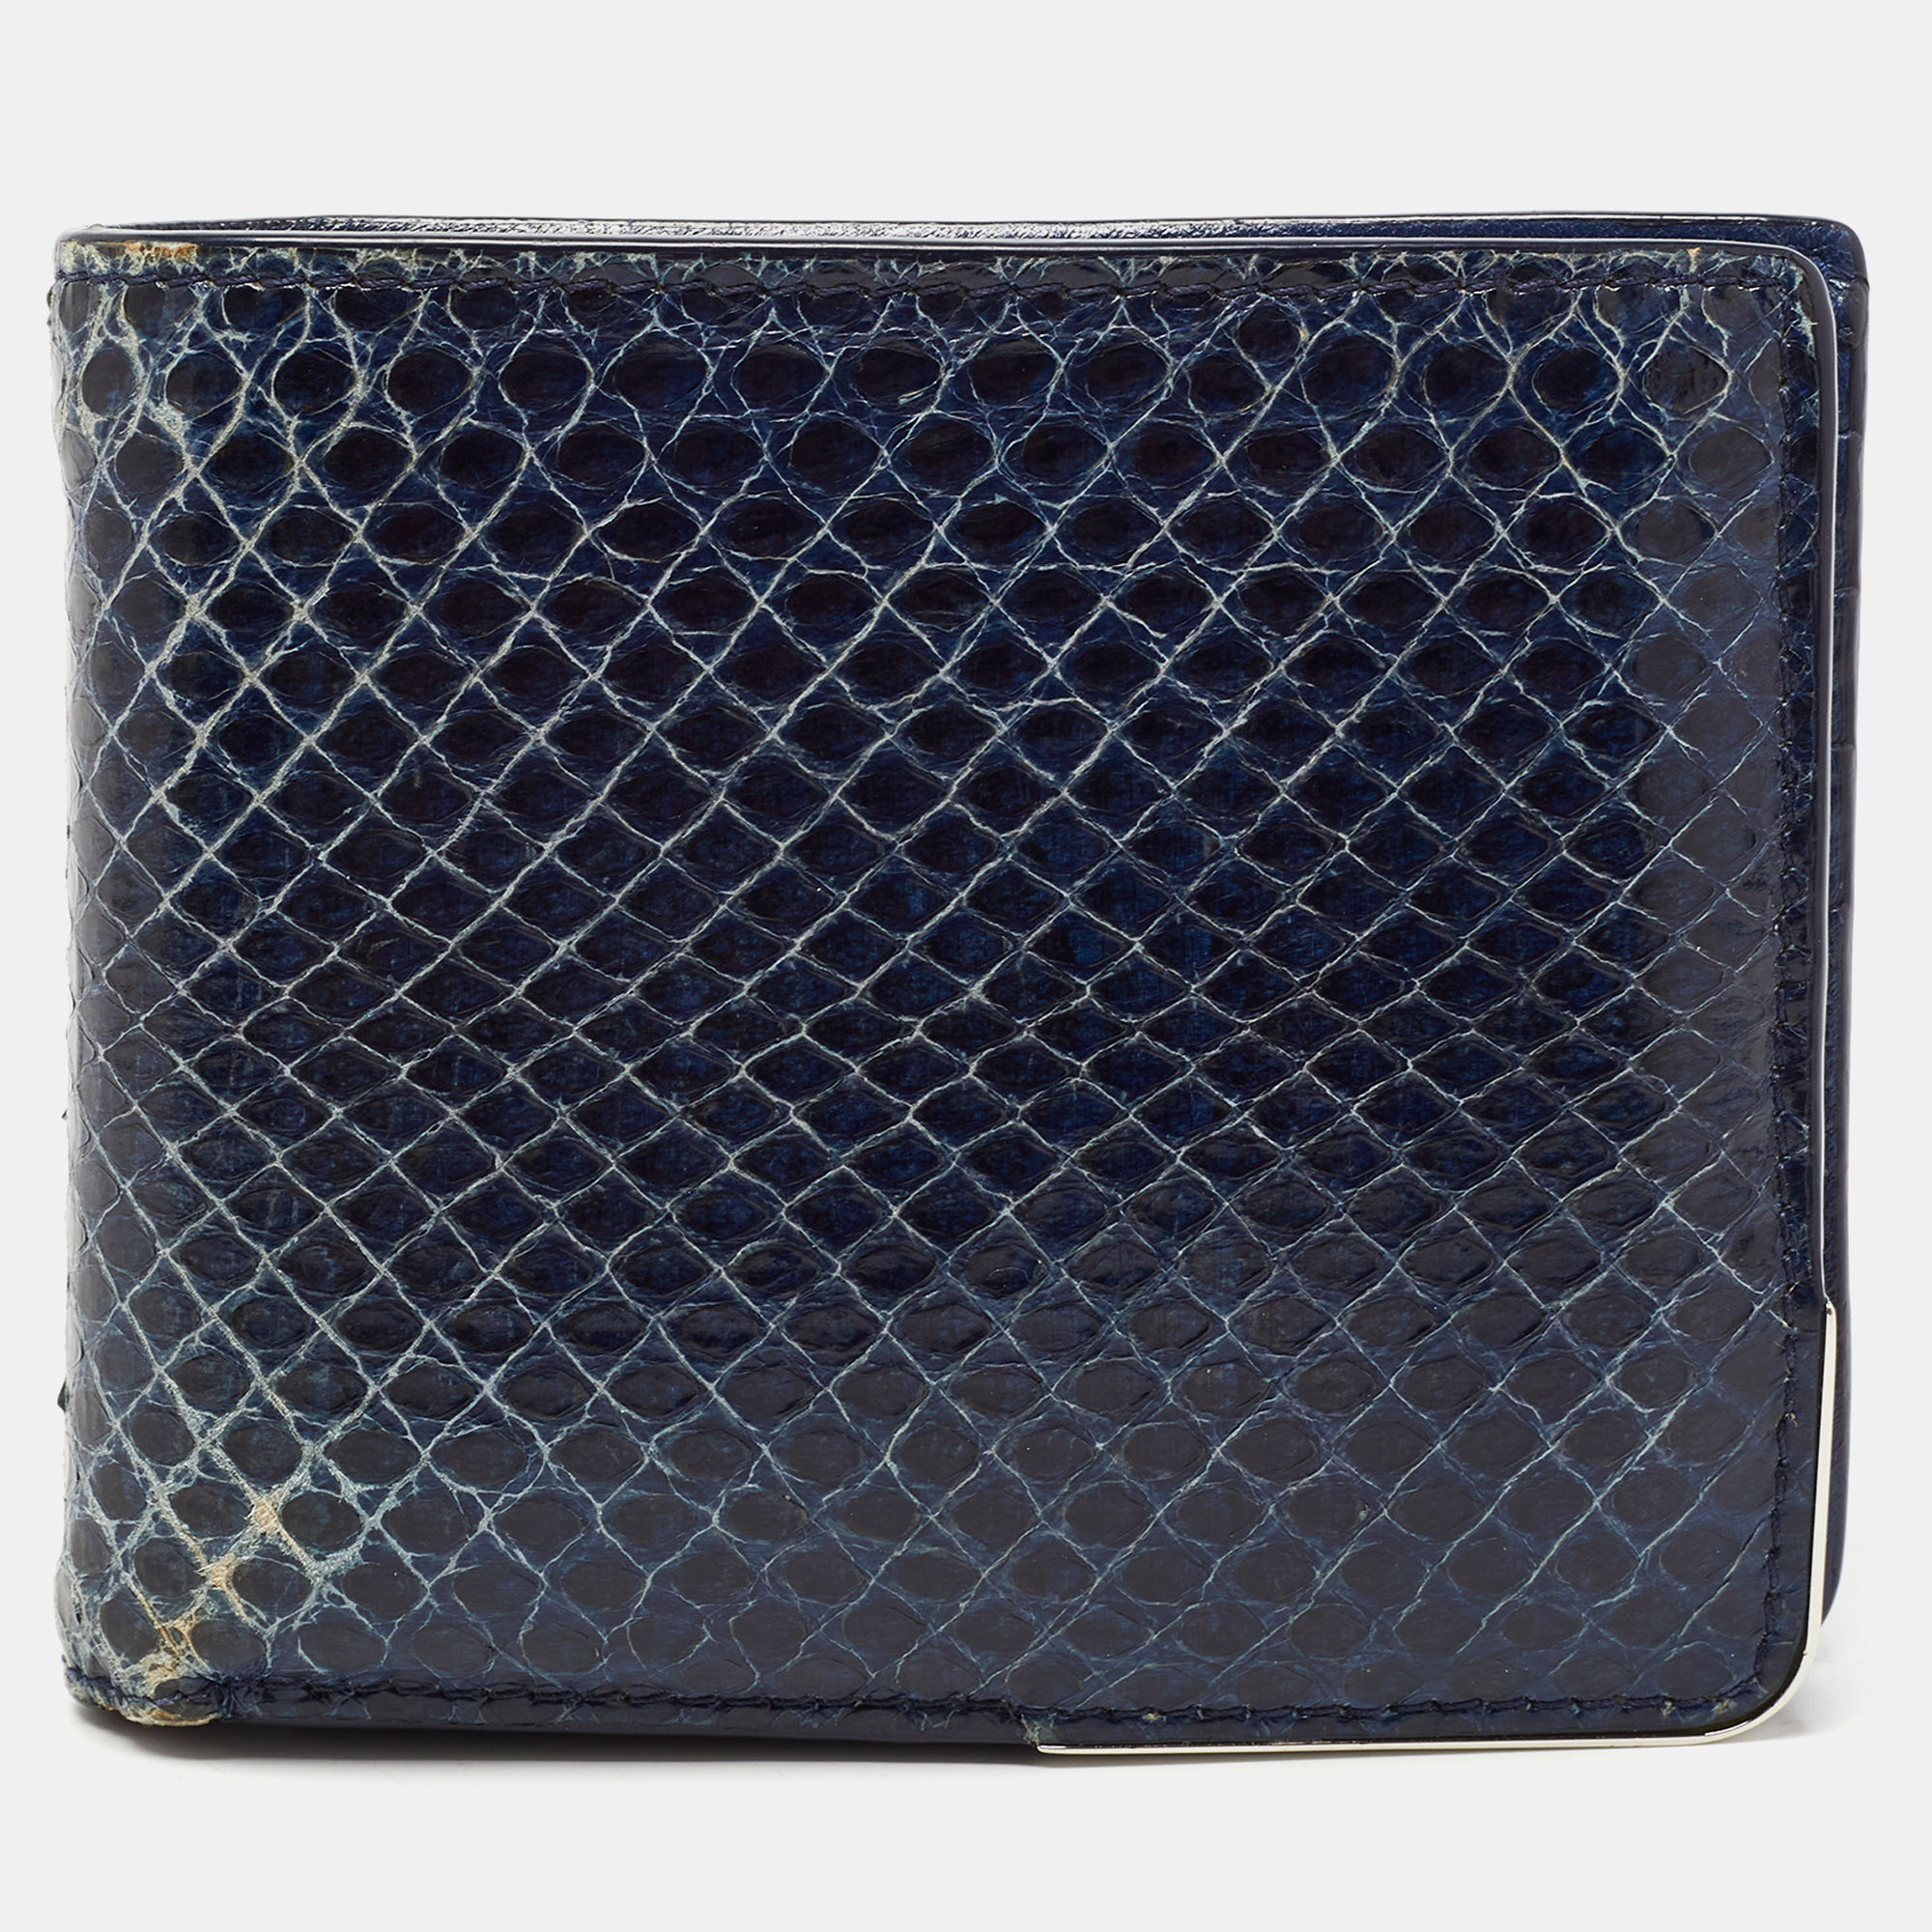 Pre-owned Dior Navy Blue Watersnake Leather Metal Edge Bifold Wallet